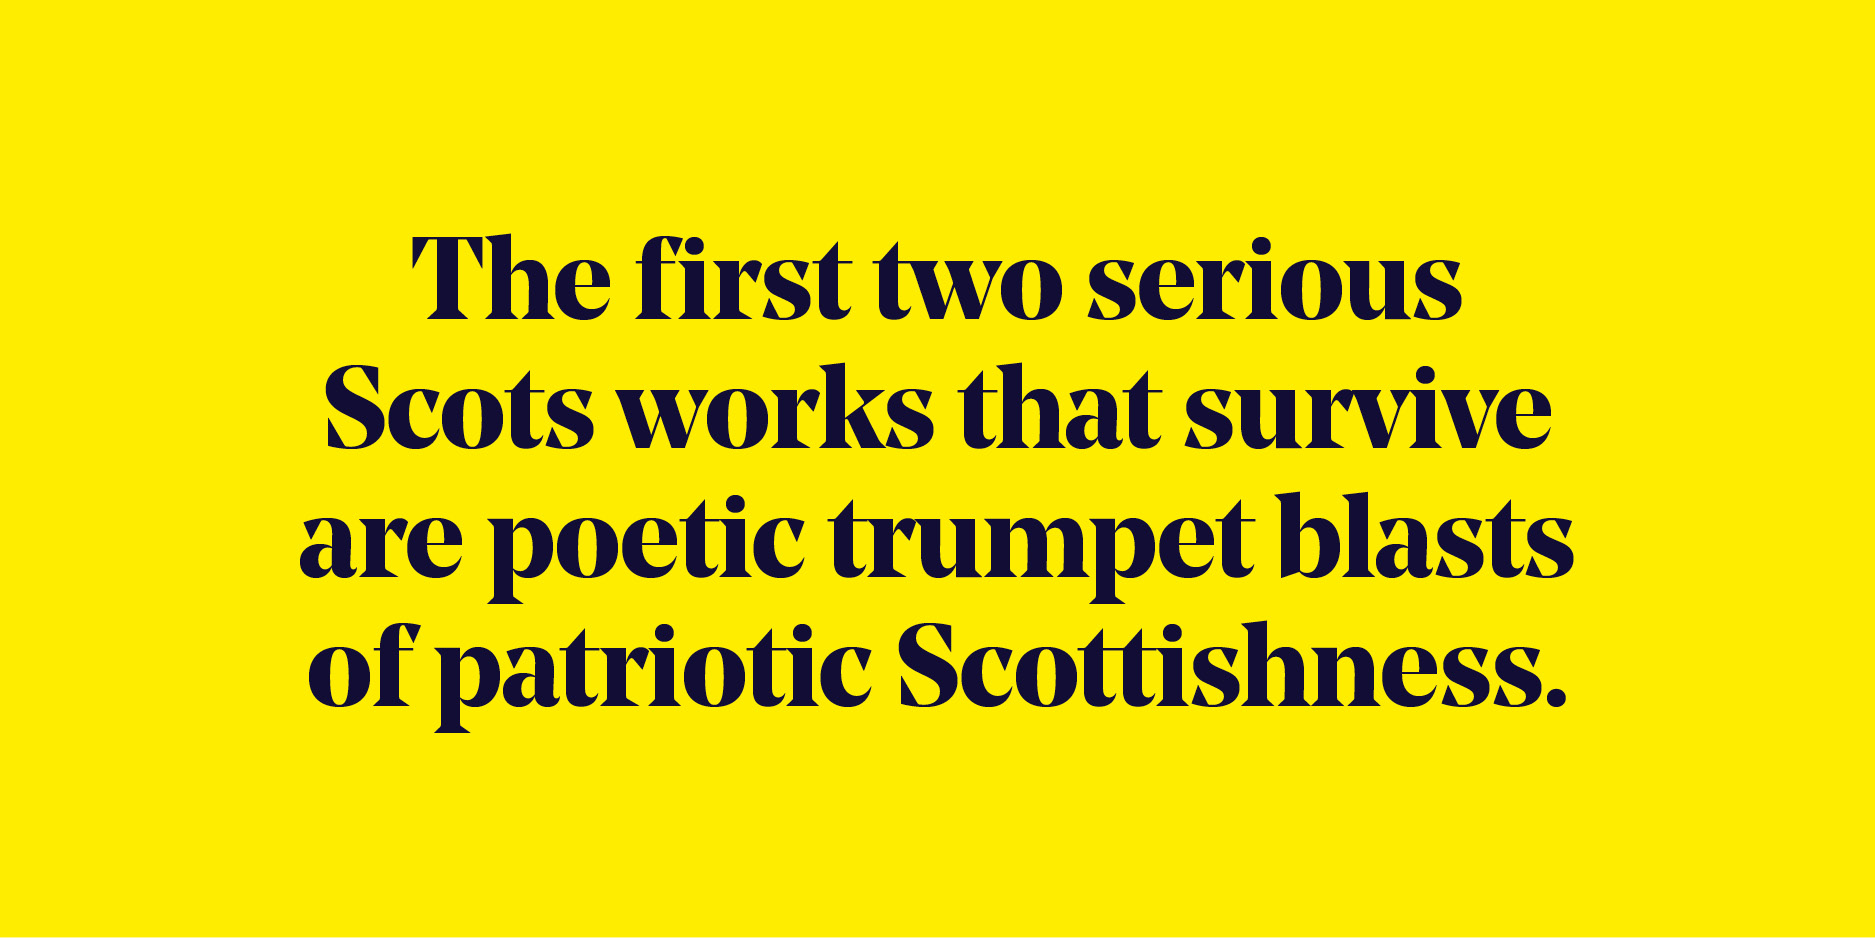 Quote: "The first two serious Scots works that survive are poetic trumpet blasts of patriotic Scottishness."